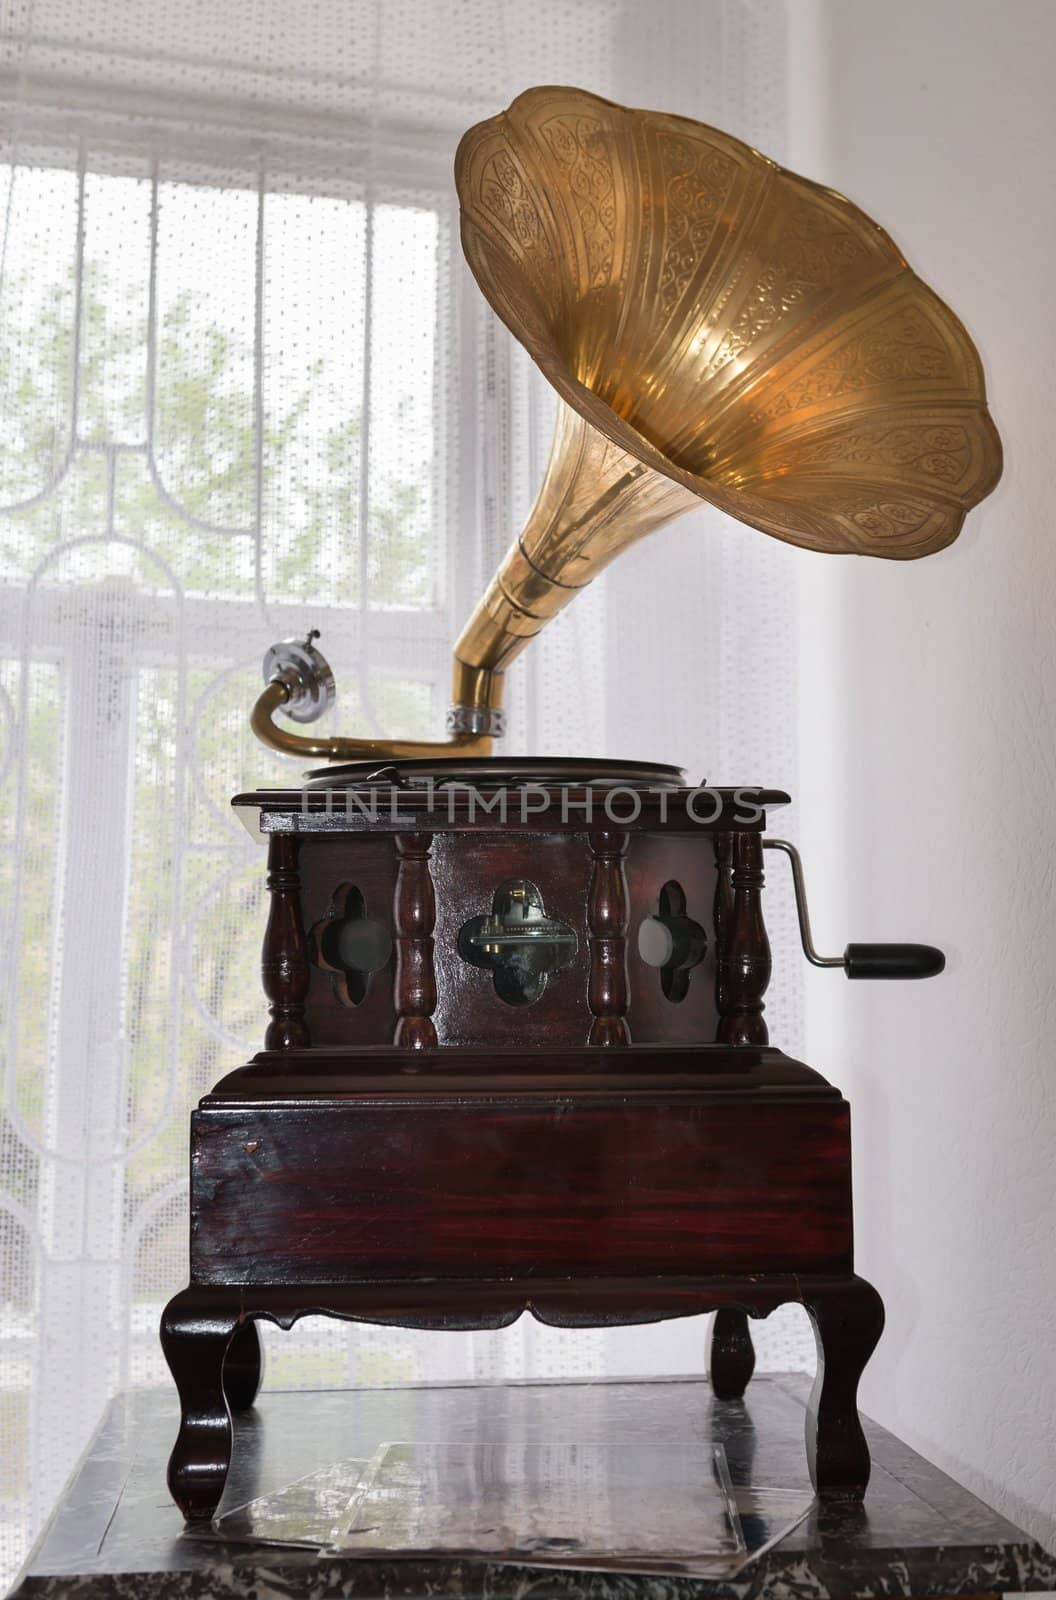 Gramophone in front of a window in vintage interior